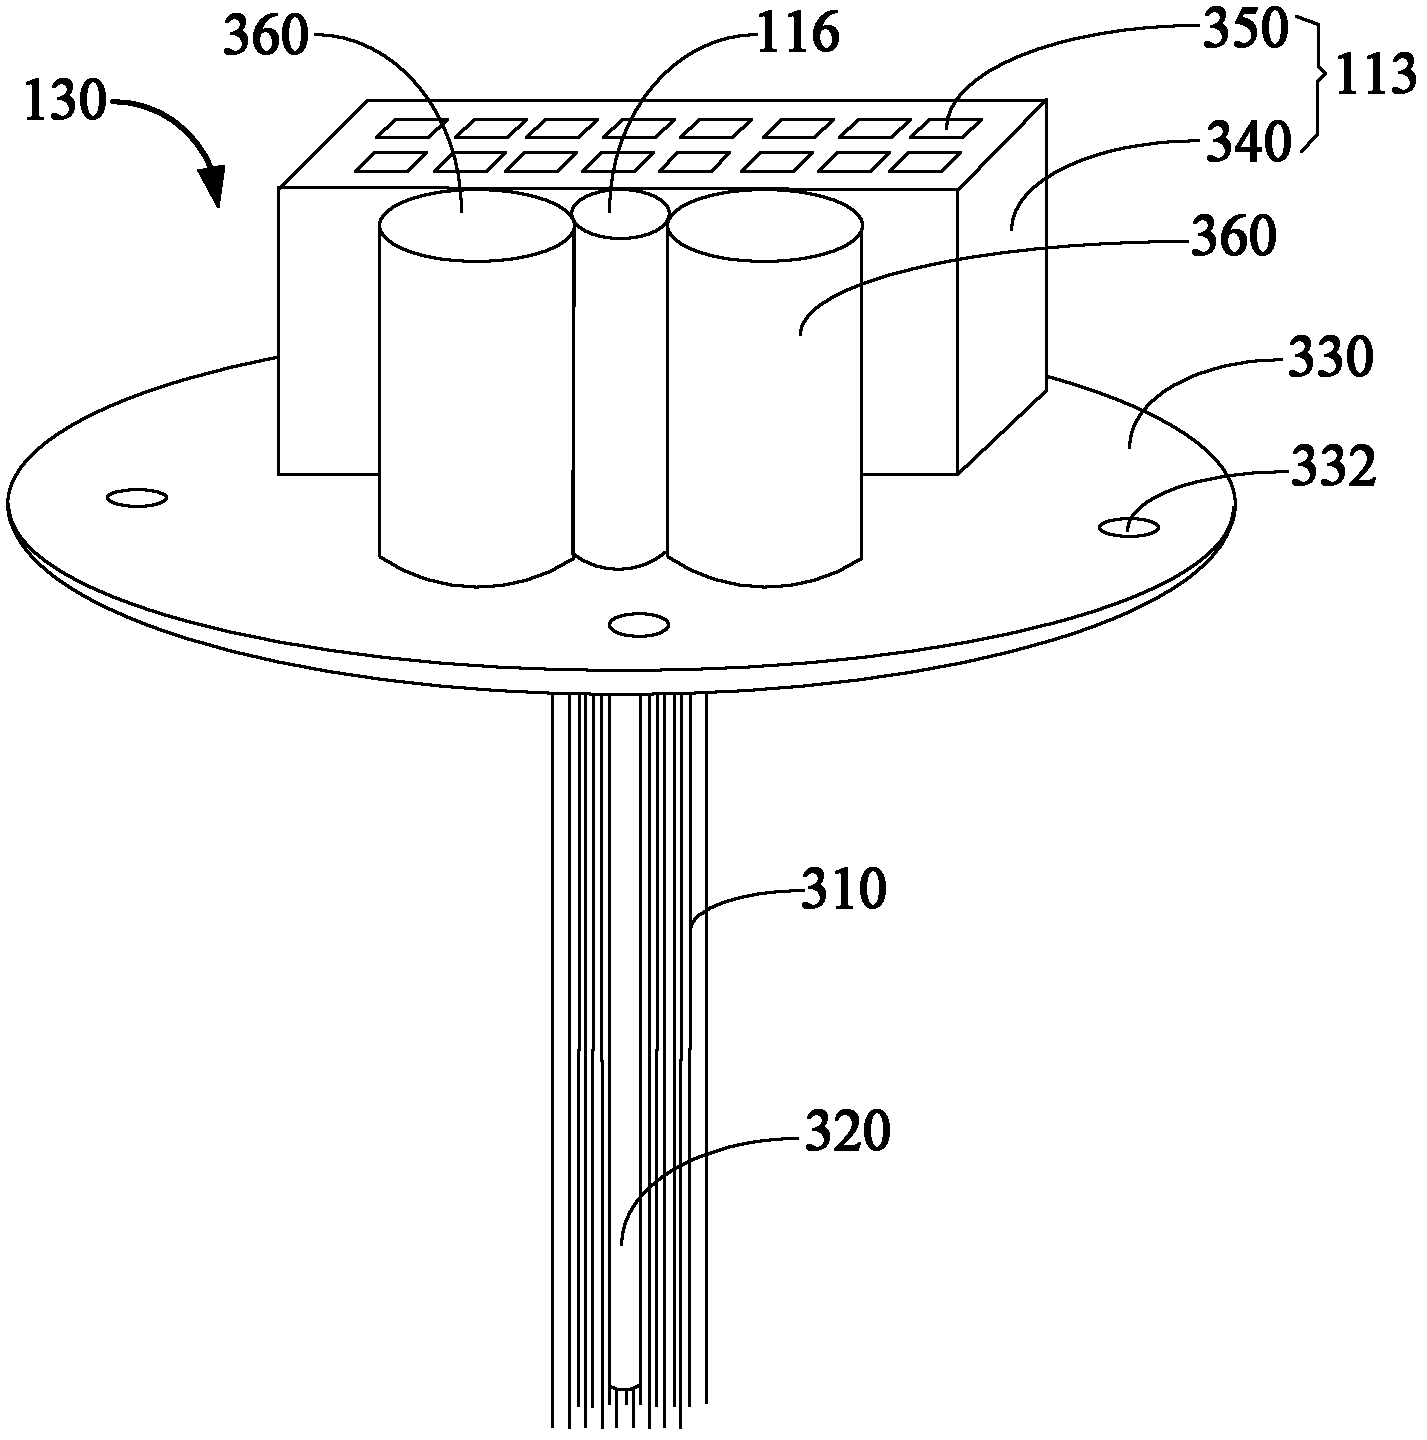 Implanted photoelectrode collecting, regulating and controlling device